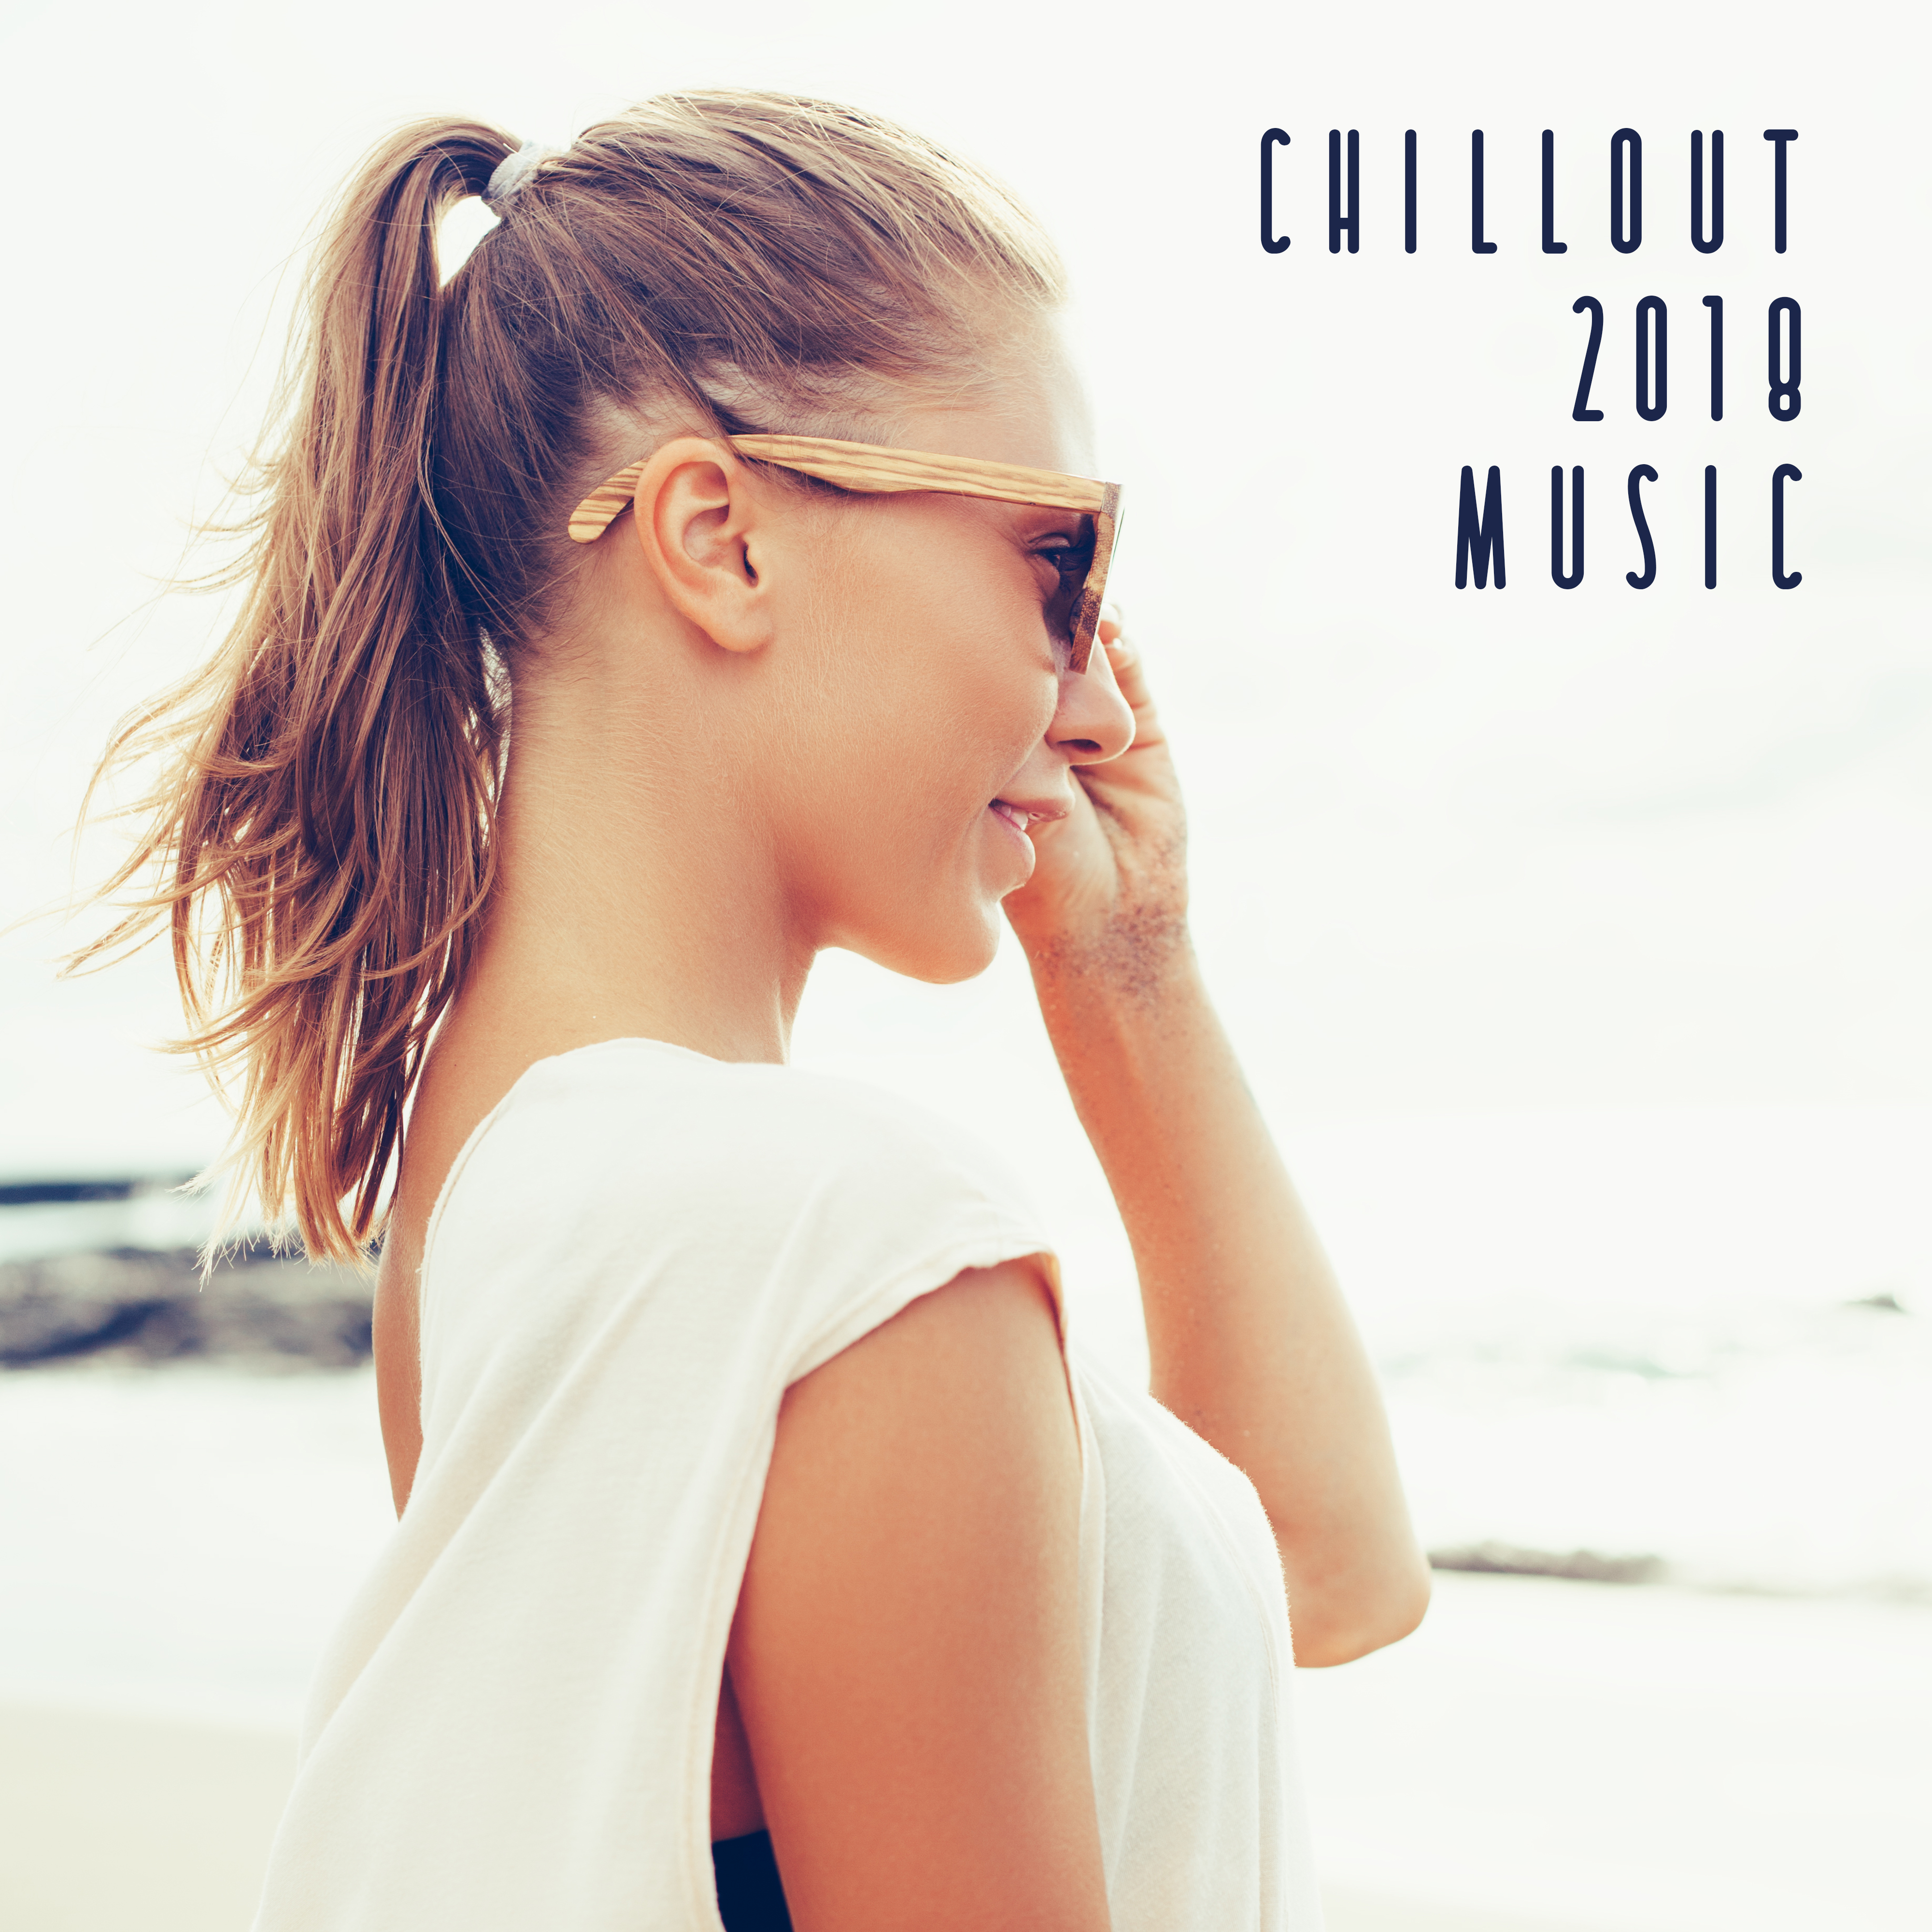 Chillout 2018 Music